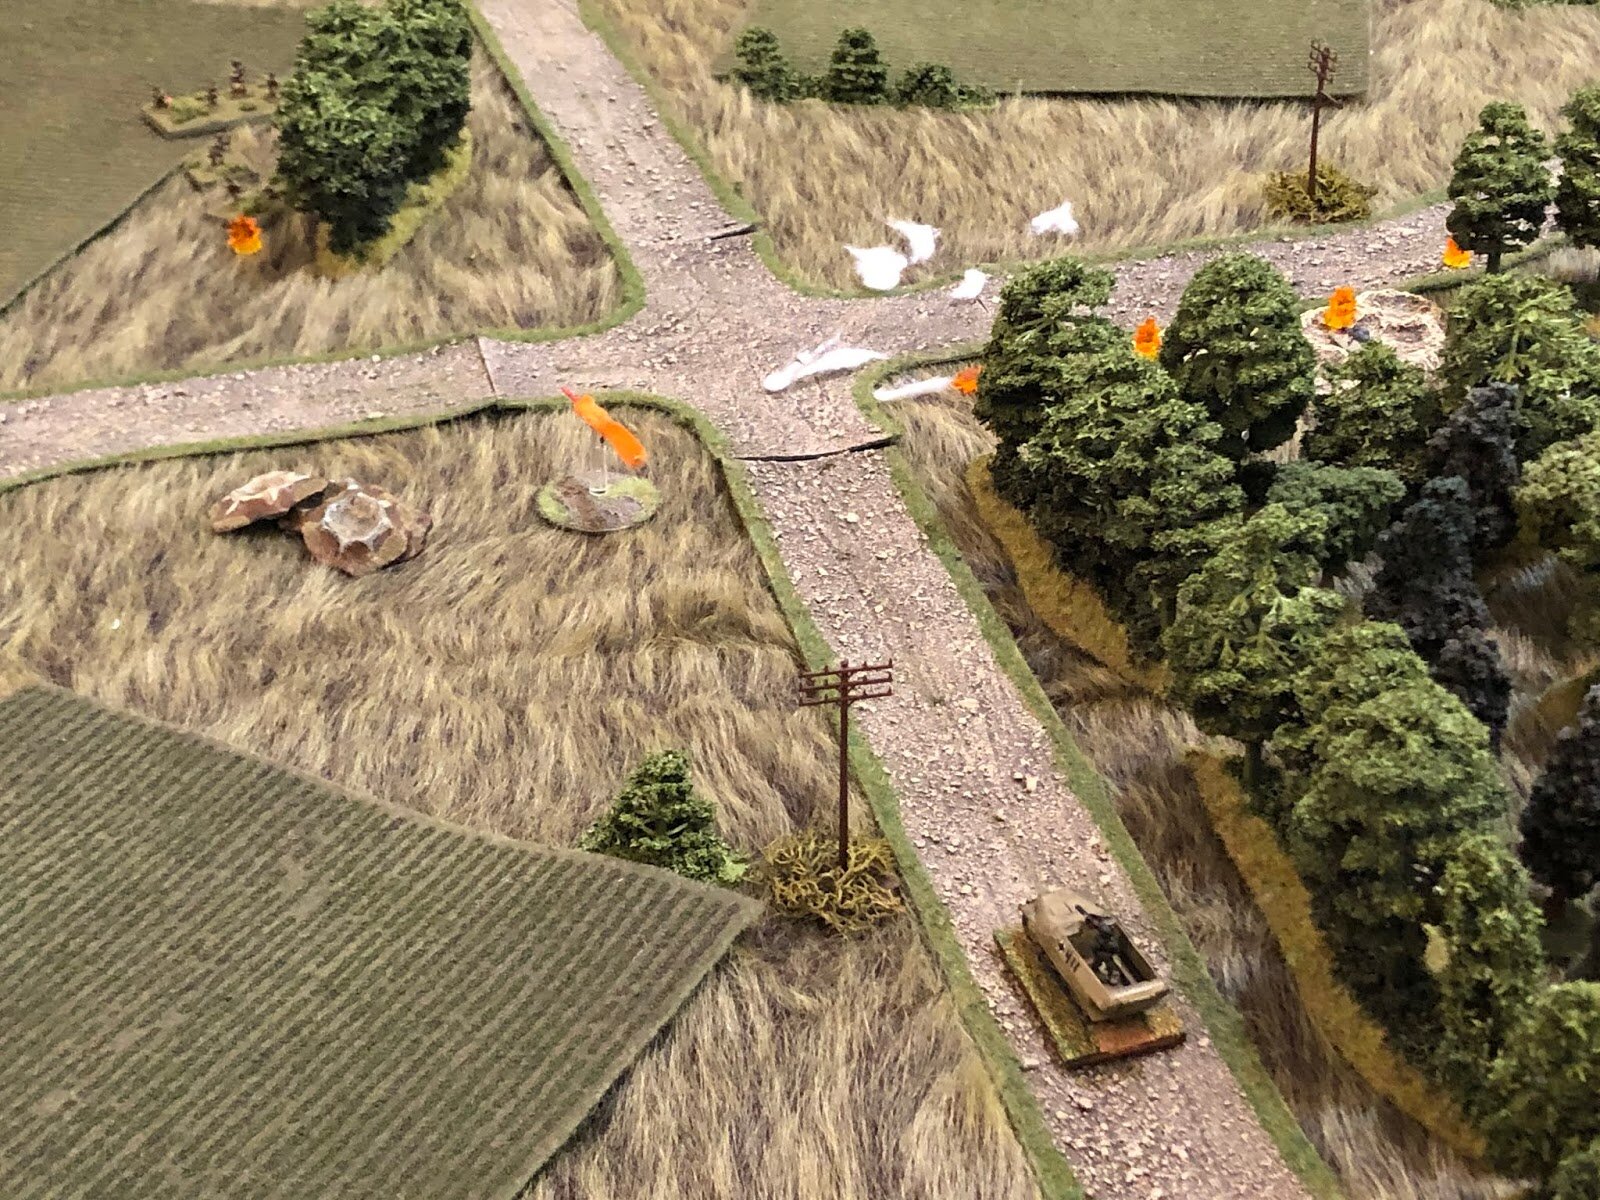  Nearing the objective, the German halftrack PC (bottom right) spots the Soviet 2nd Rifle Platoon (top left, with the German defenders at top right) and opens fire with their MG-42, to no effect.  *Ha, I'm a knucklehead! I left a stack of craters lyi